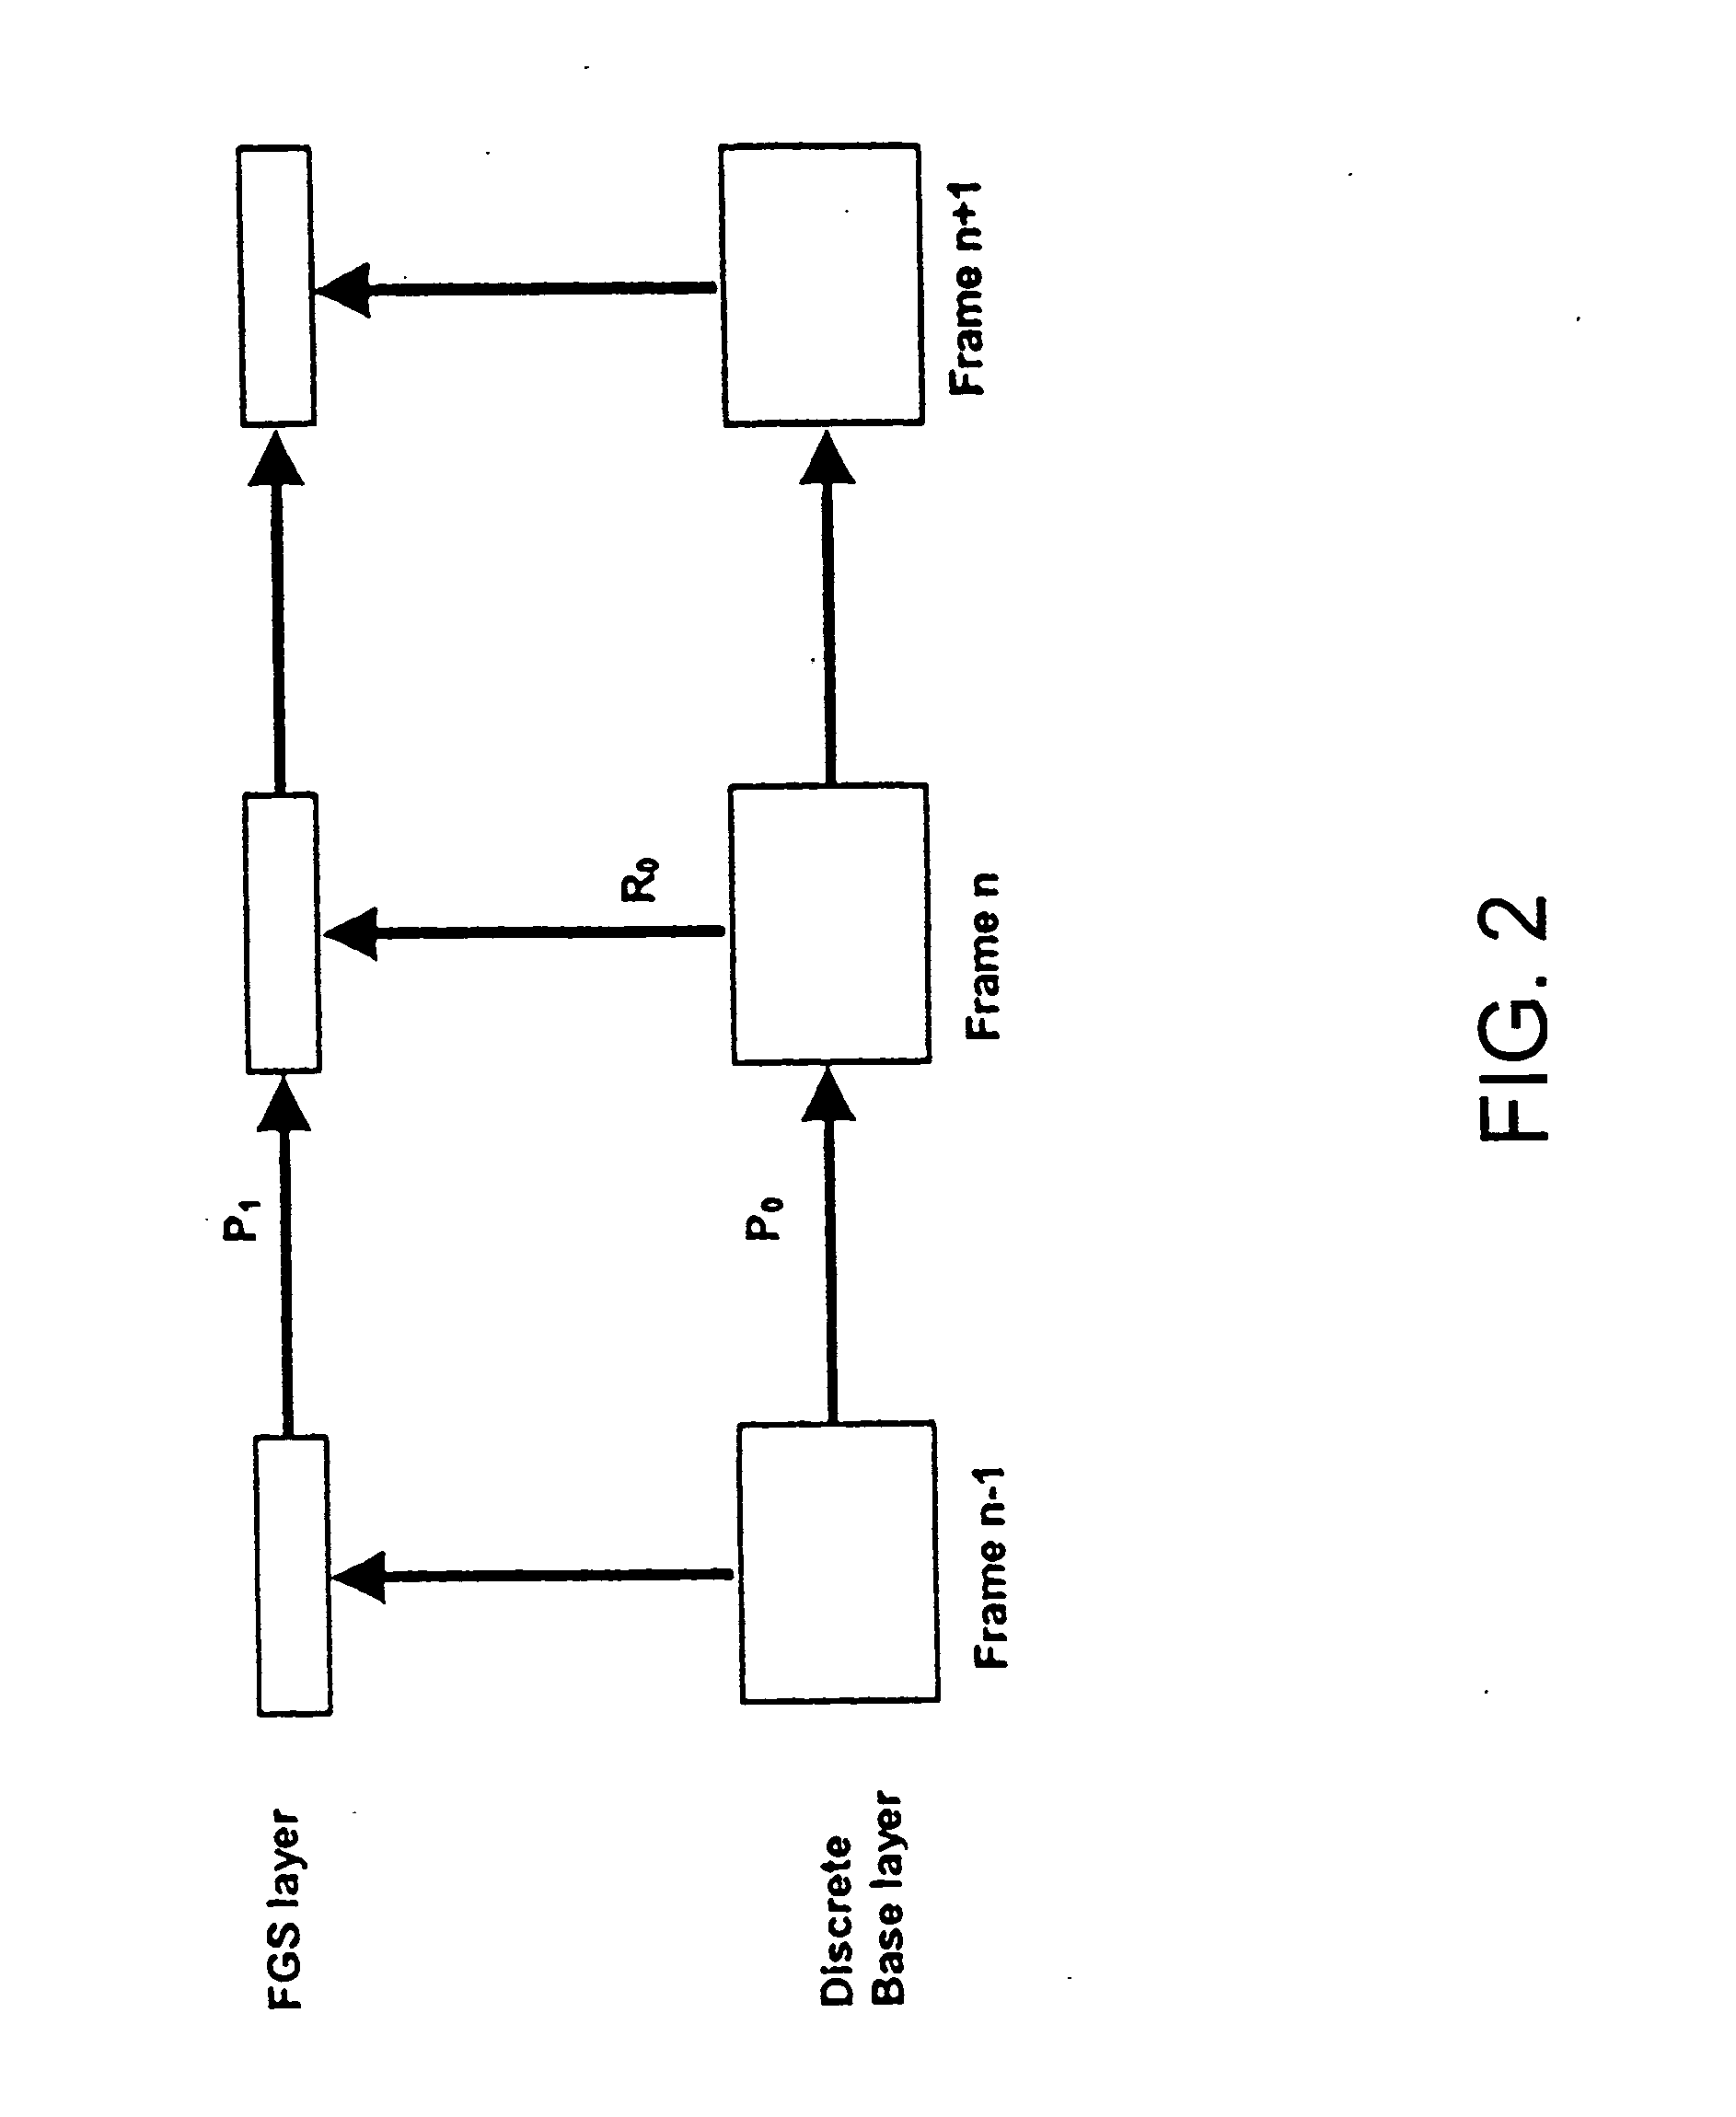 System and apparatus for low-complexity fine granularity scalable video coding with motion compensation